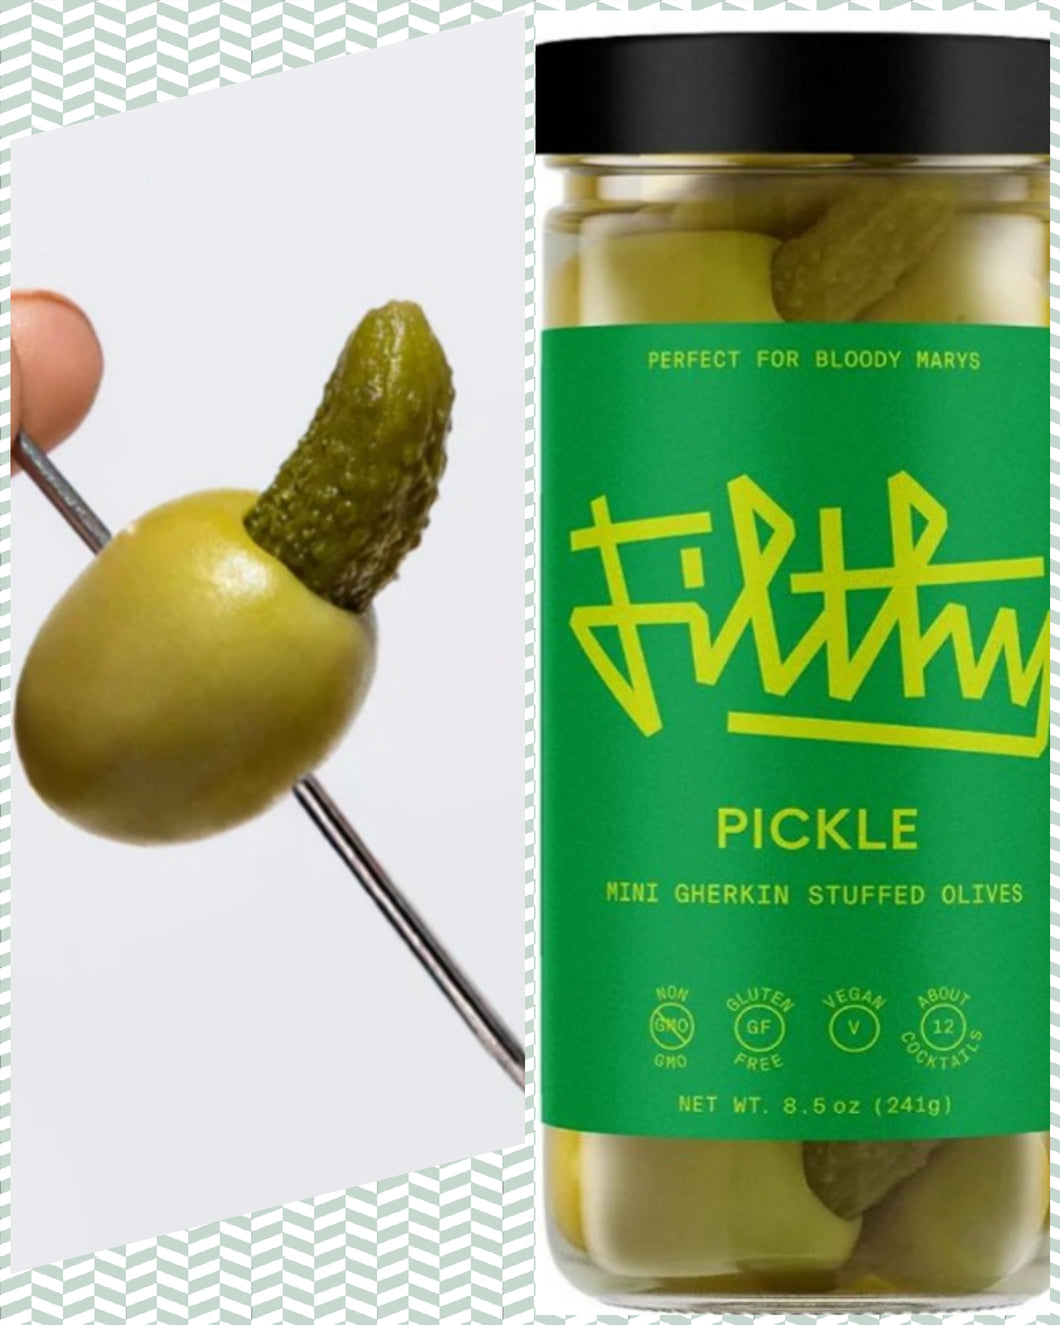 Filthy Pickle